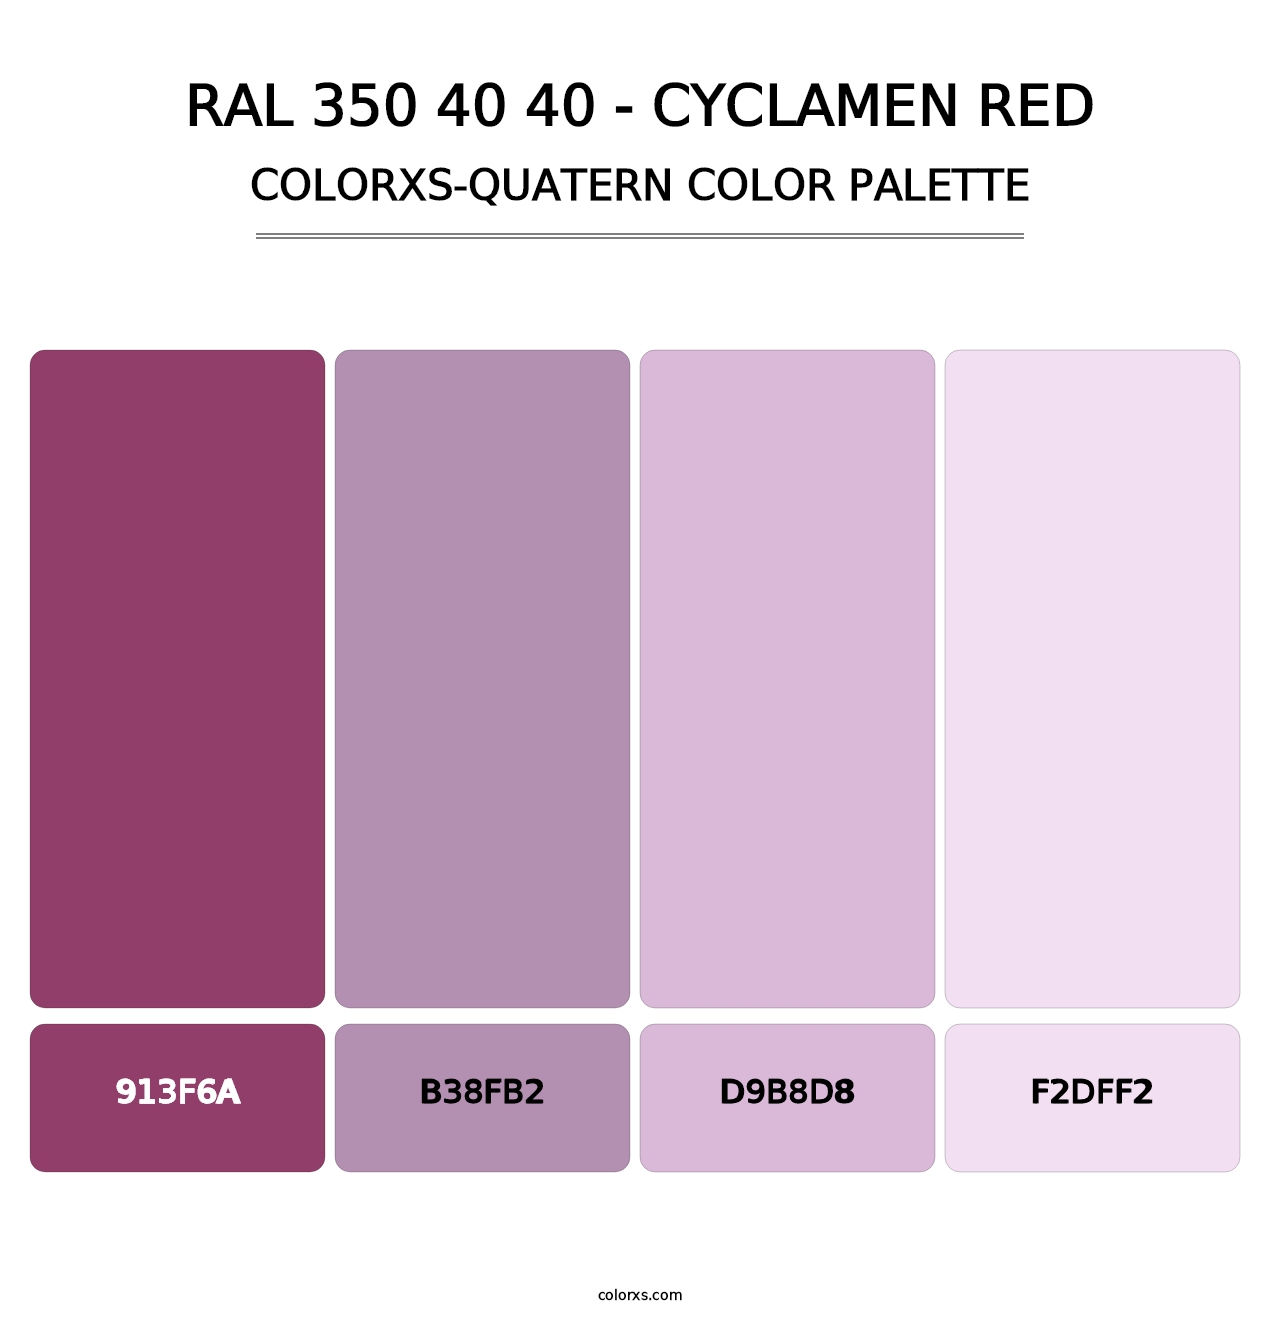 RAL 350 40 40 - Cyclamen Red - Colorxs Quatern Palette